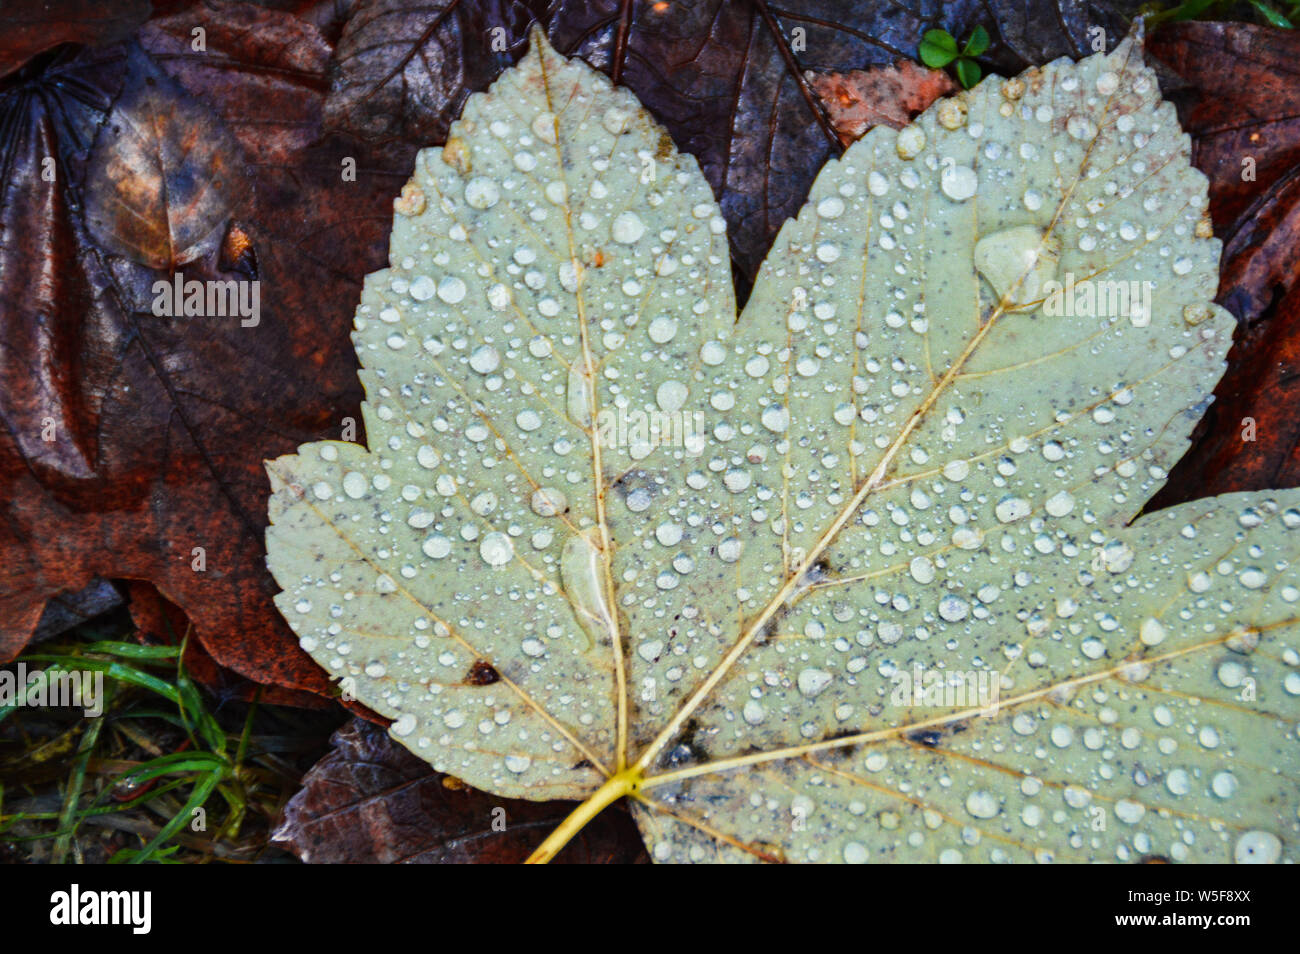 morning dew caught on the fallen autumn leaves Stock Photo